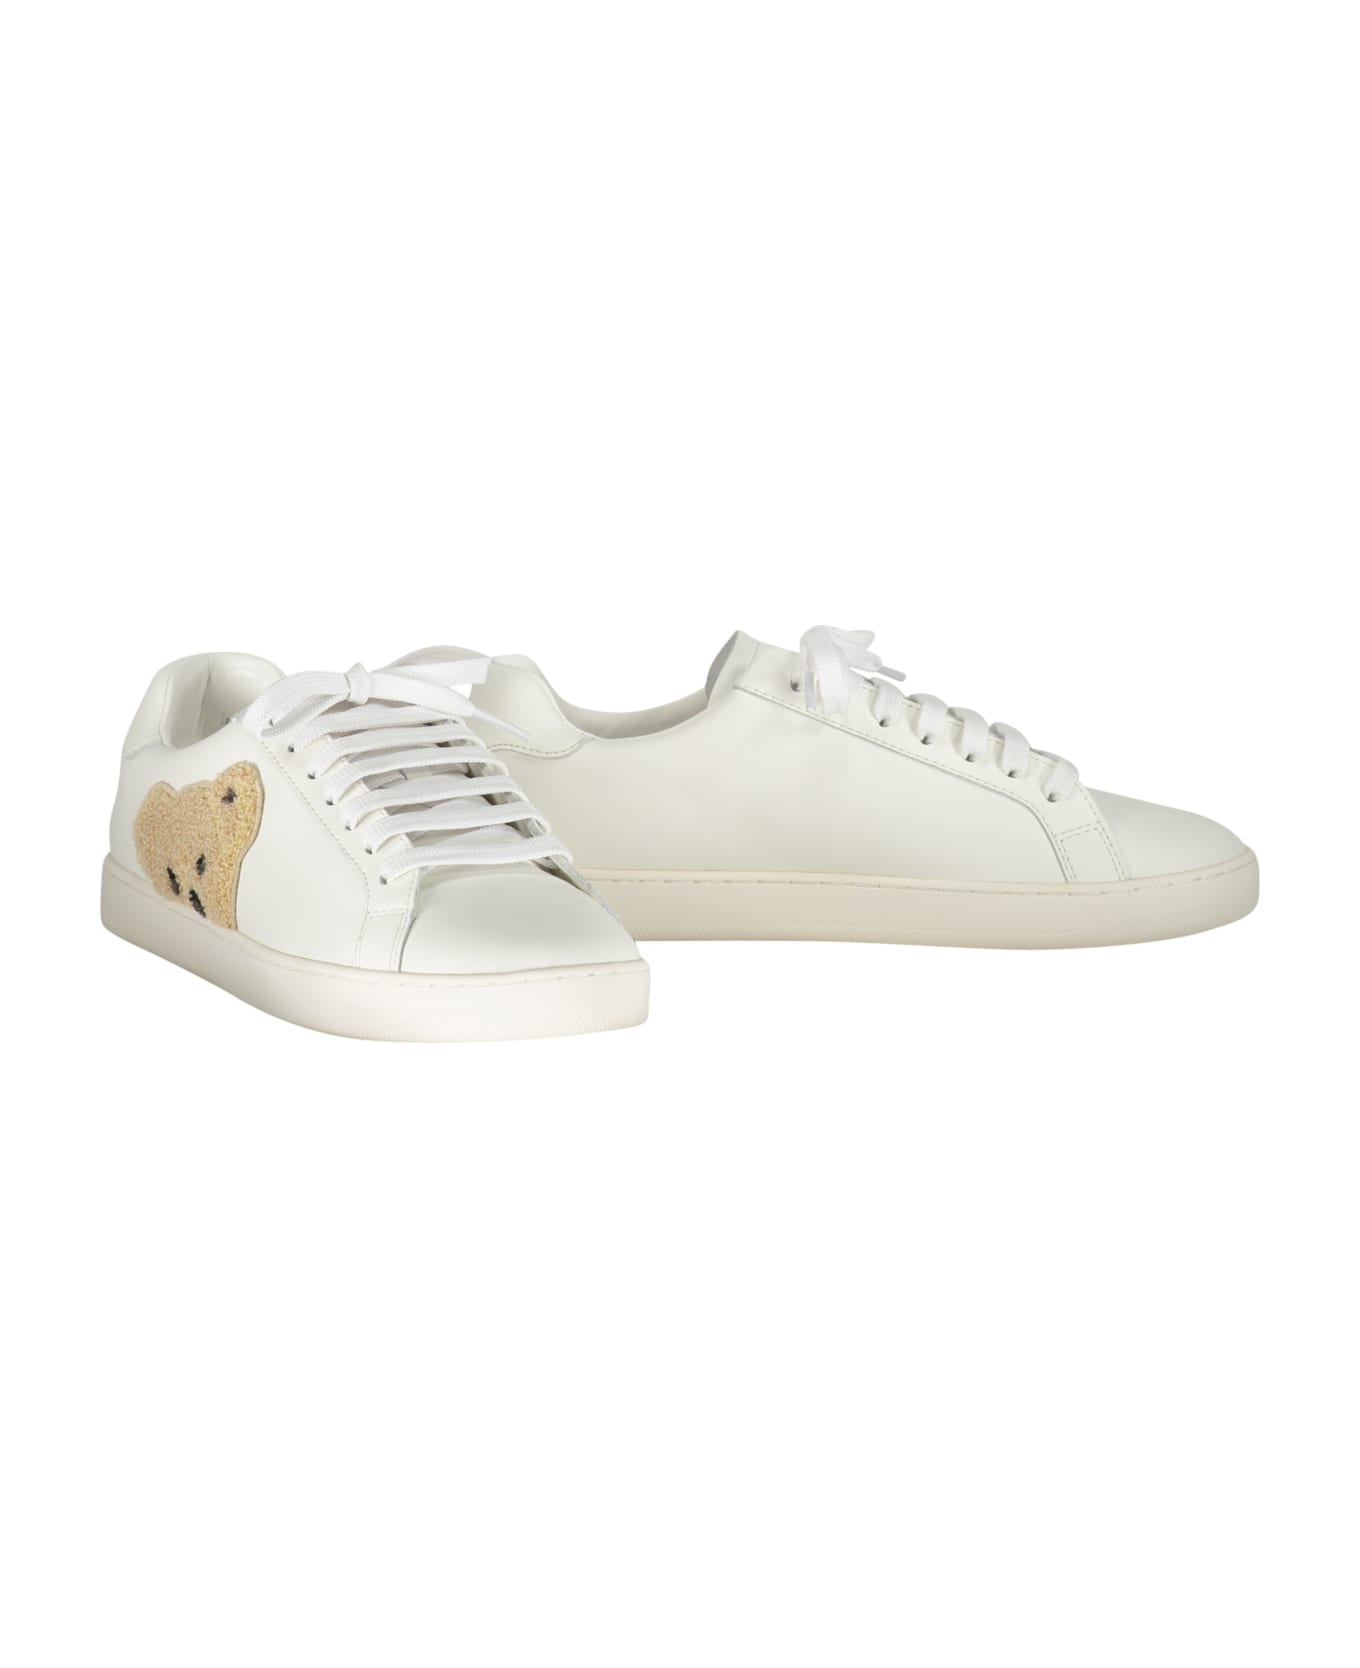 Palm Angels New Teddy Bear Leather Low-top Sneakers - White スニーカー